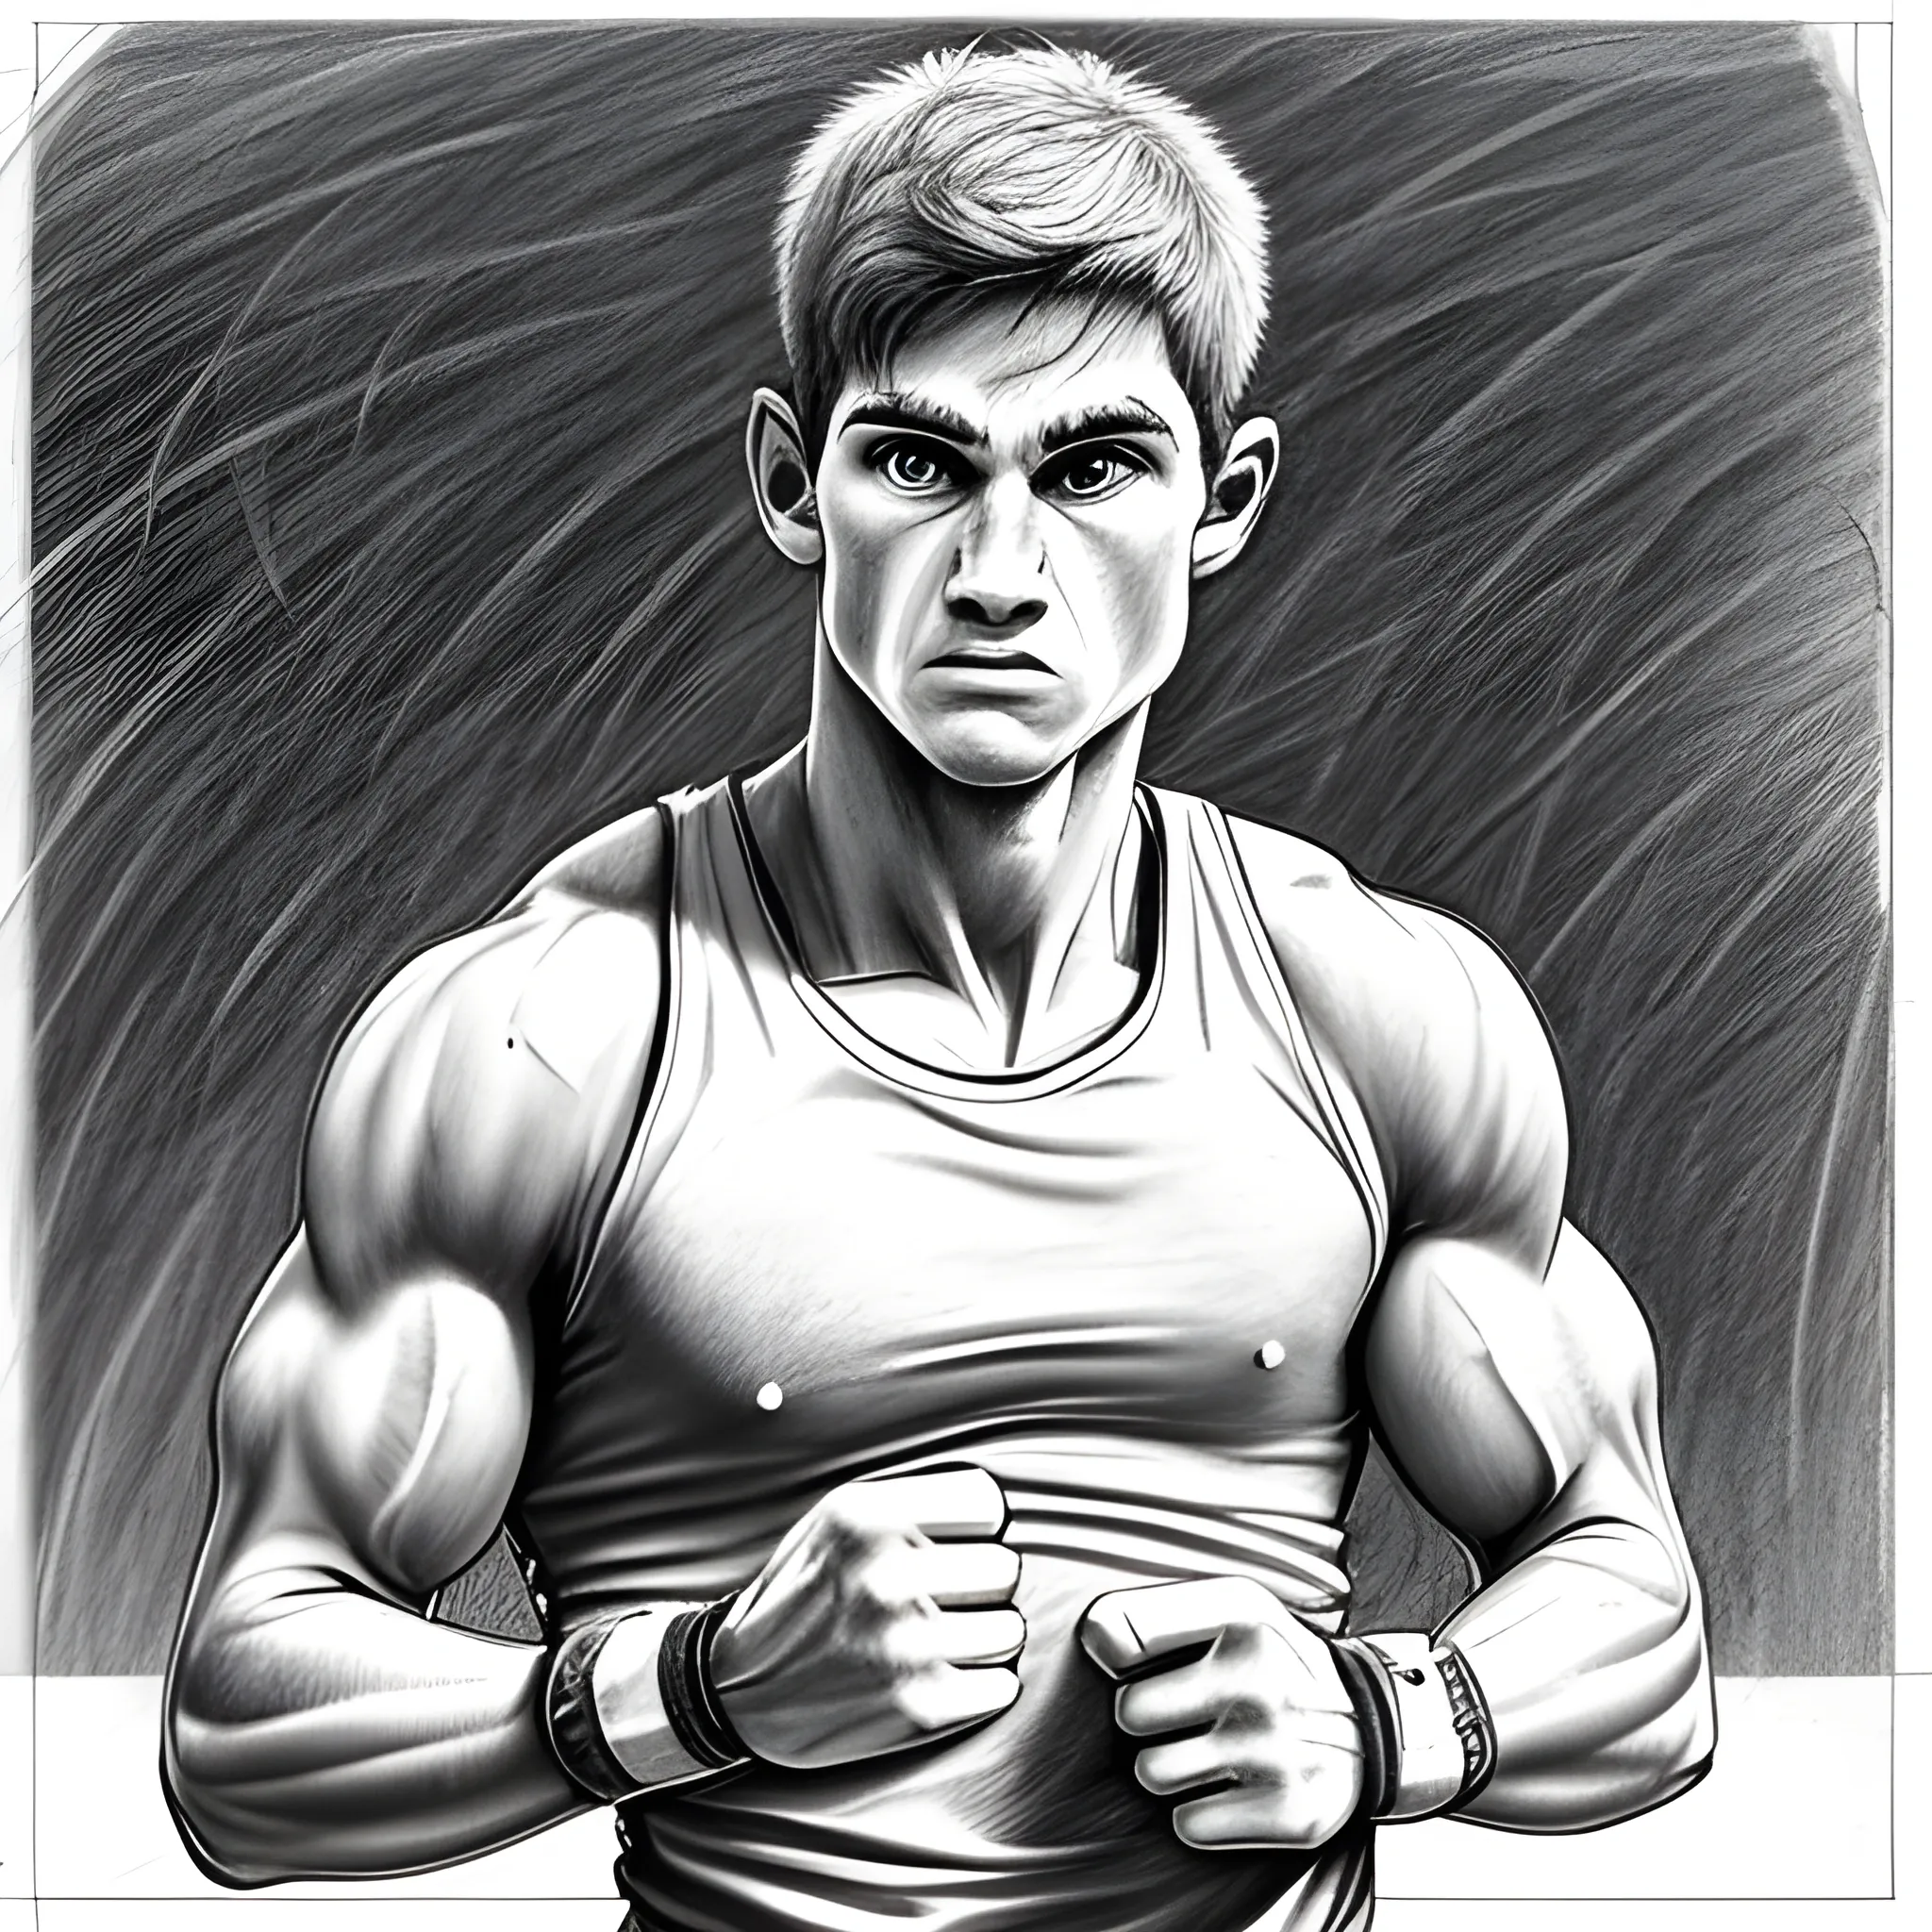 , Pencil Sketch mentally tough racing athlete winning in physical tournament
, Cartoon